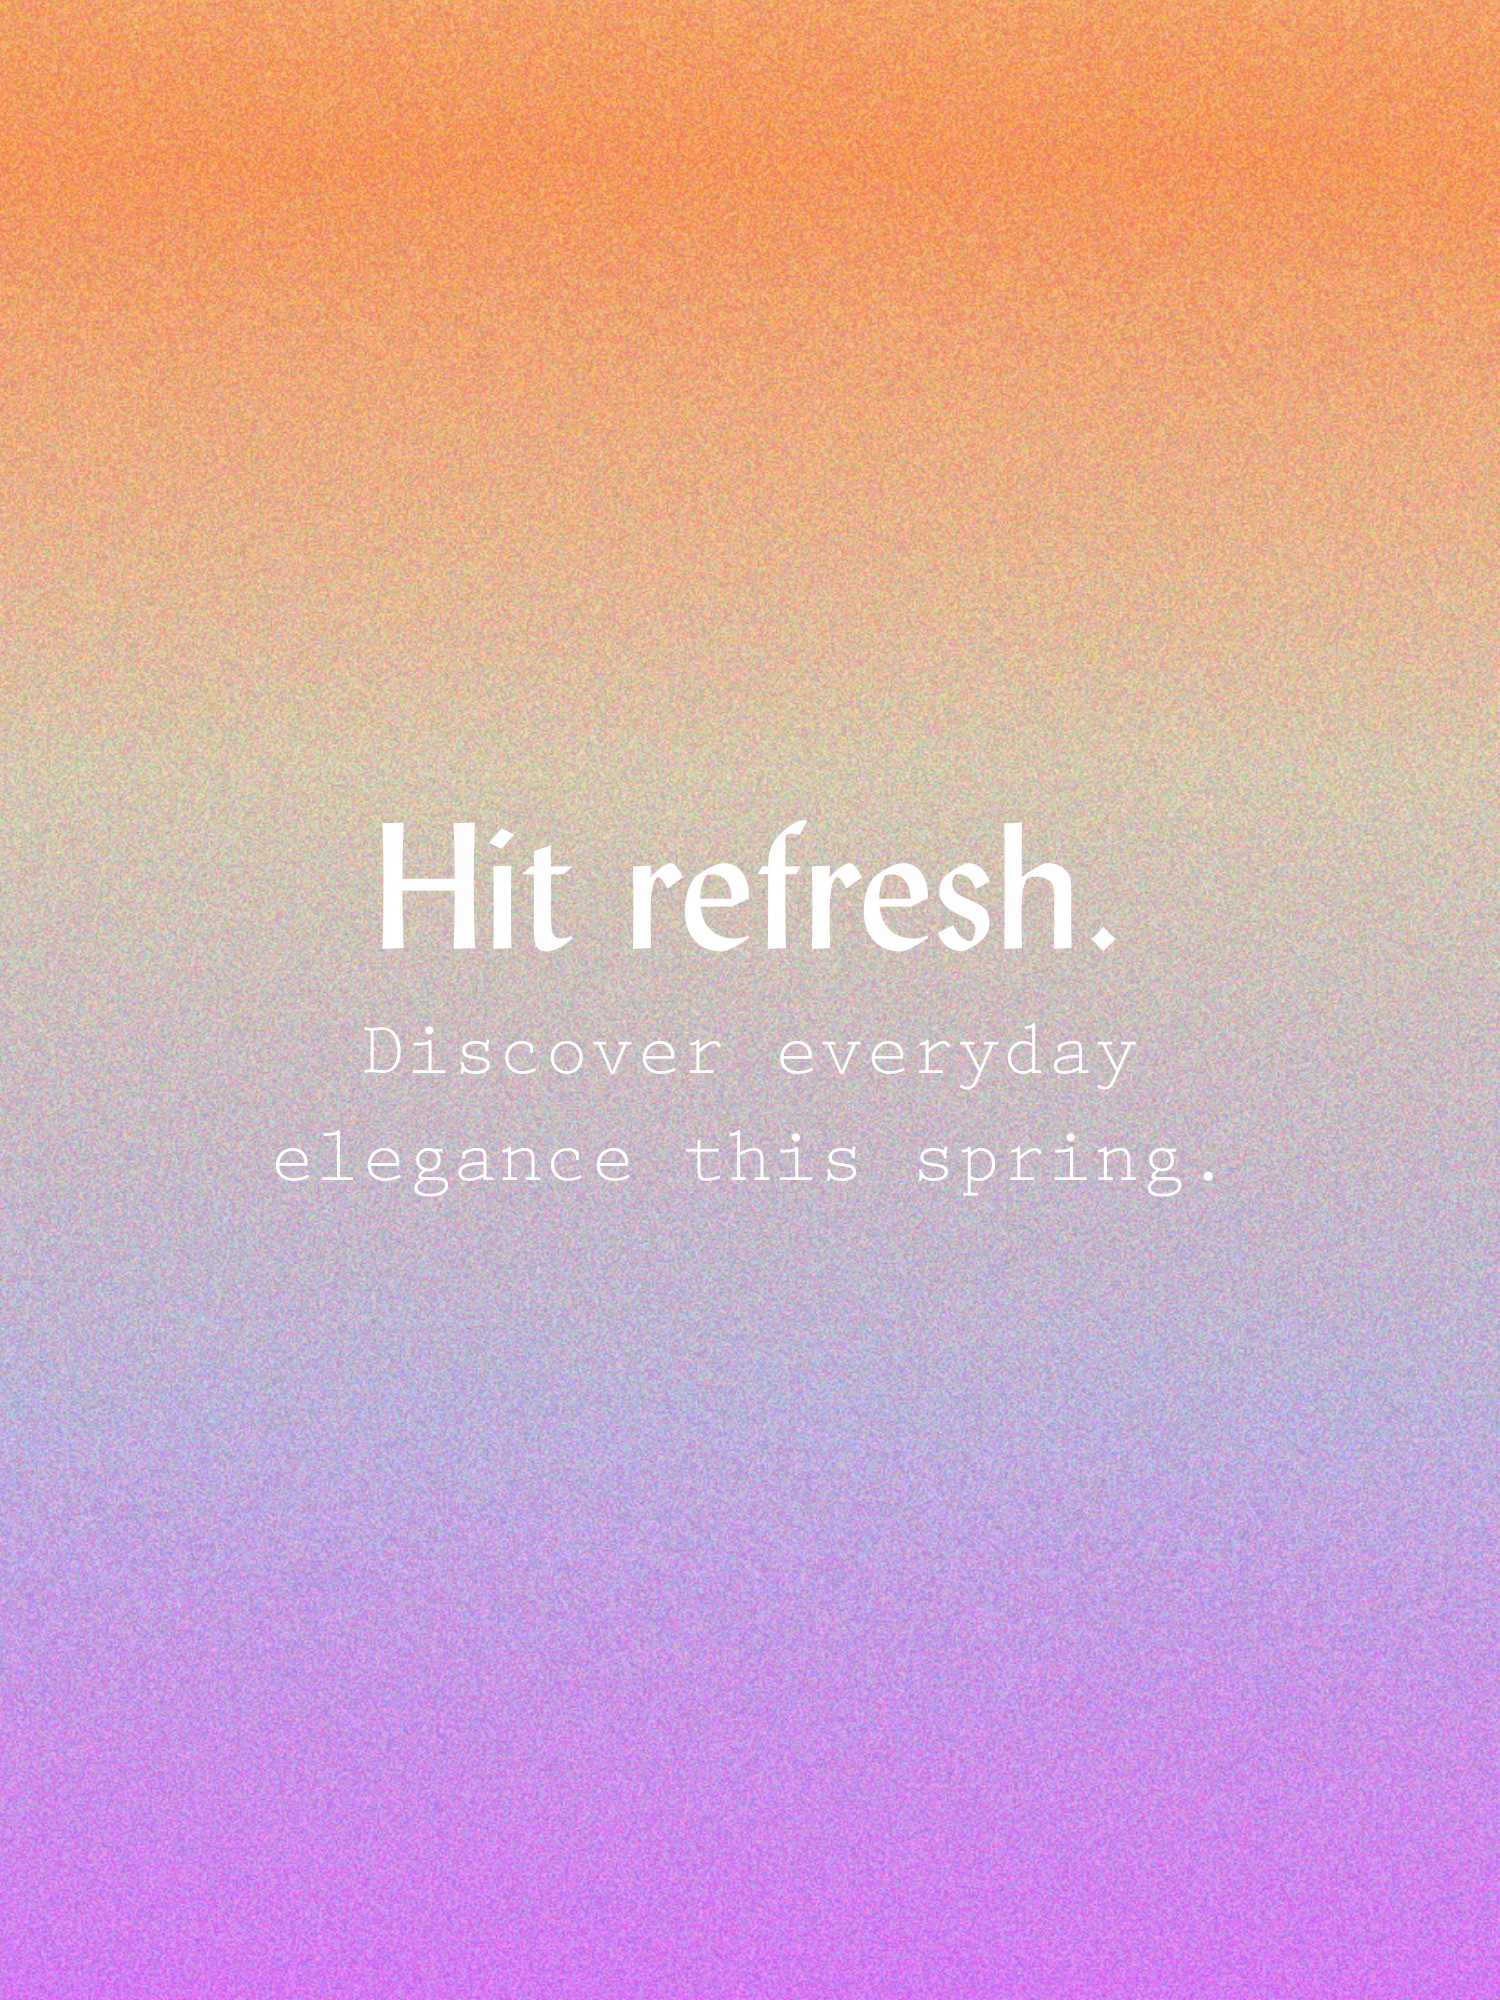 Hit Refresh. Discover everyday elegance this spring.